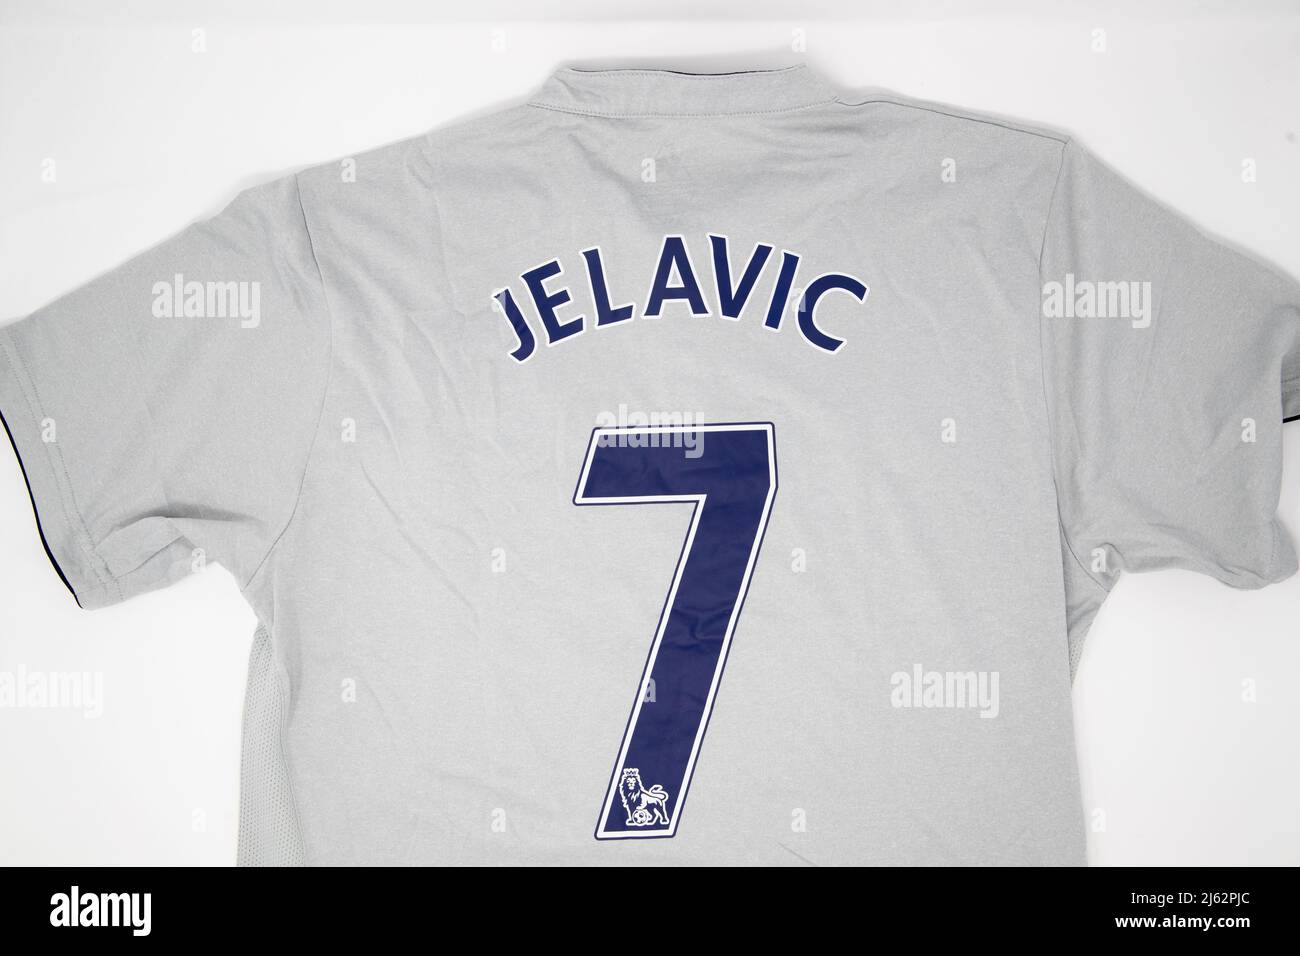 Jelavic 7 on the reverse of a White football shirt Stock Photo